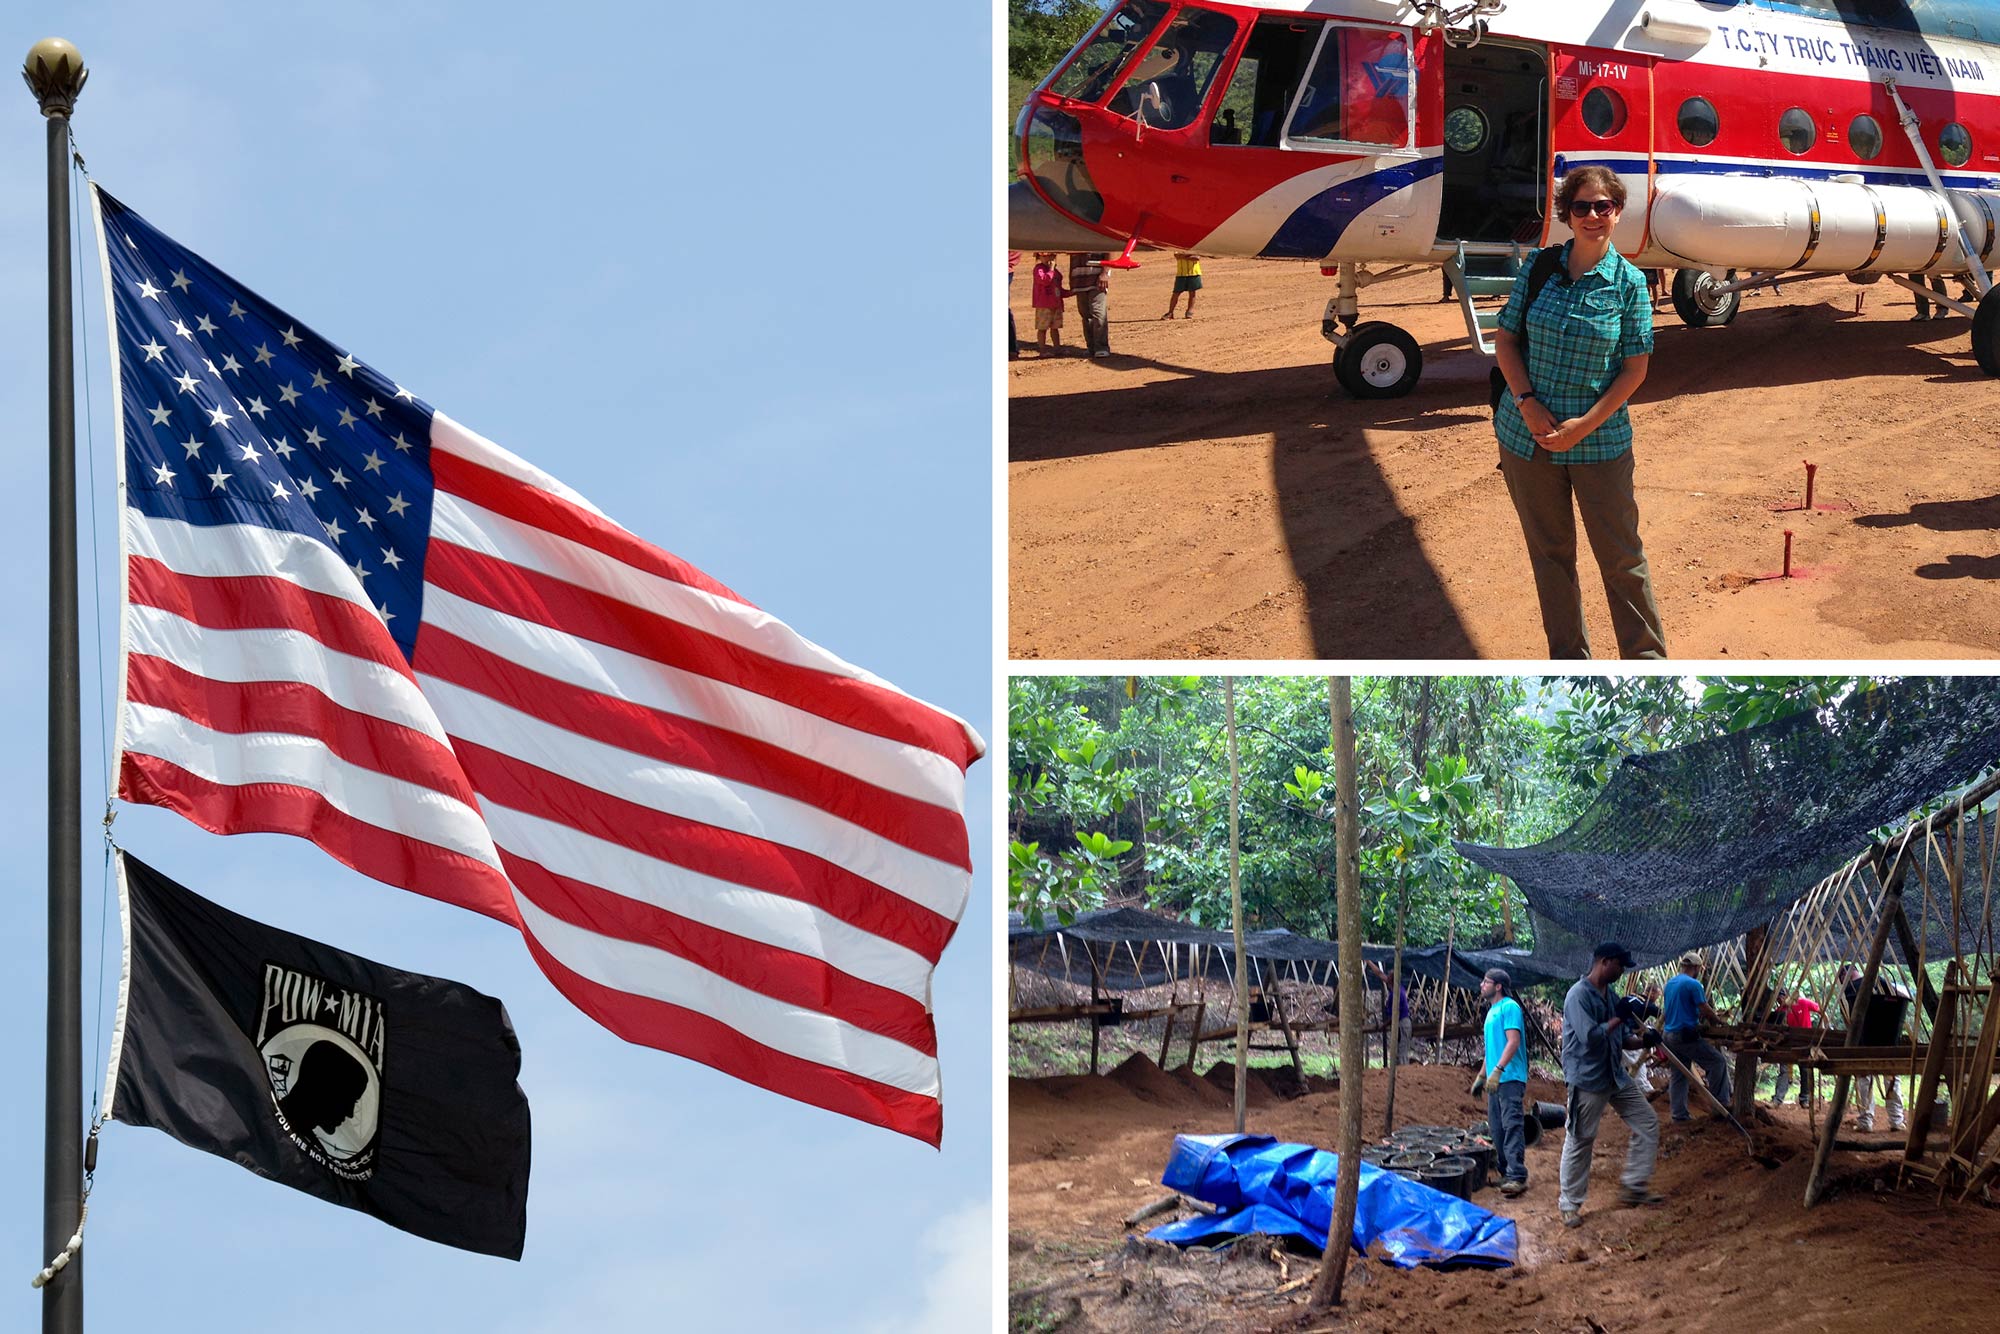 Left, a POW MIA flag flying below the American flag. Right, Terri Yost stands in front of a helicopter, and people dig for remains in a rainforest